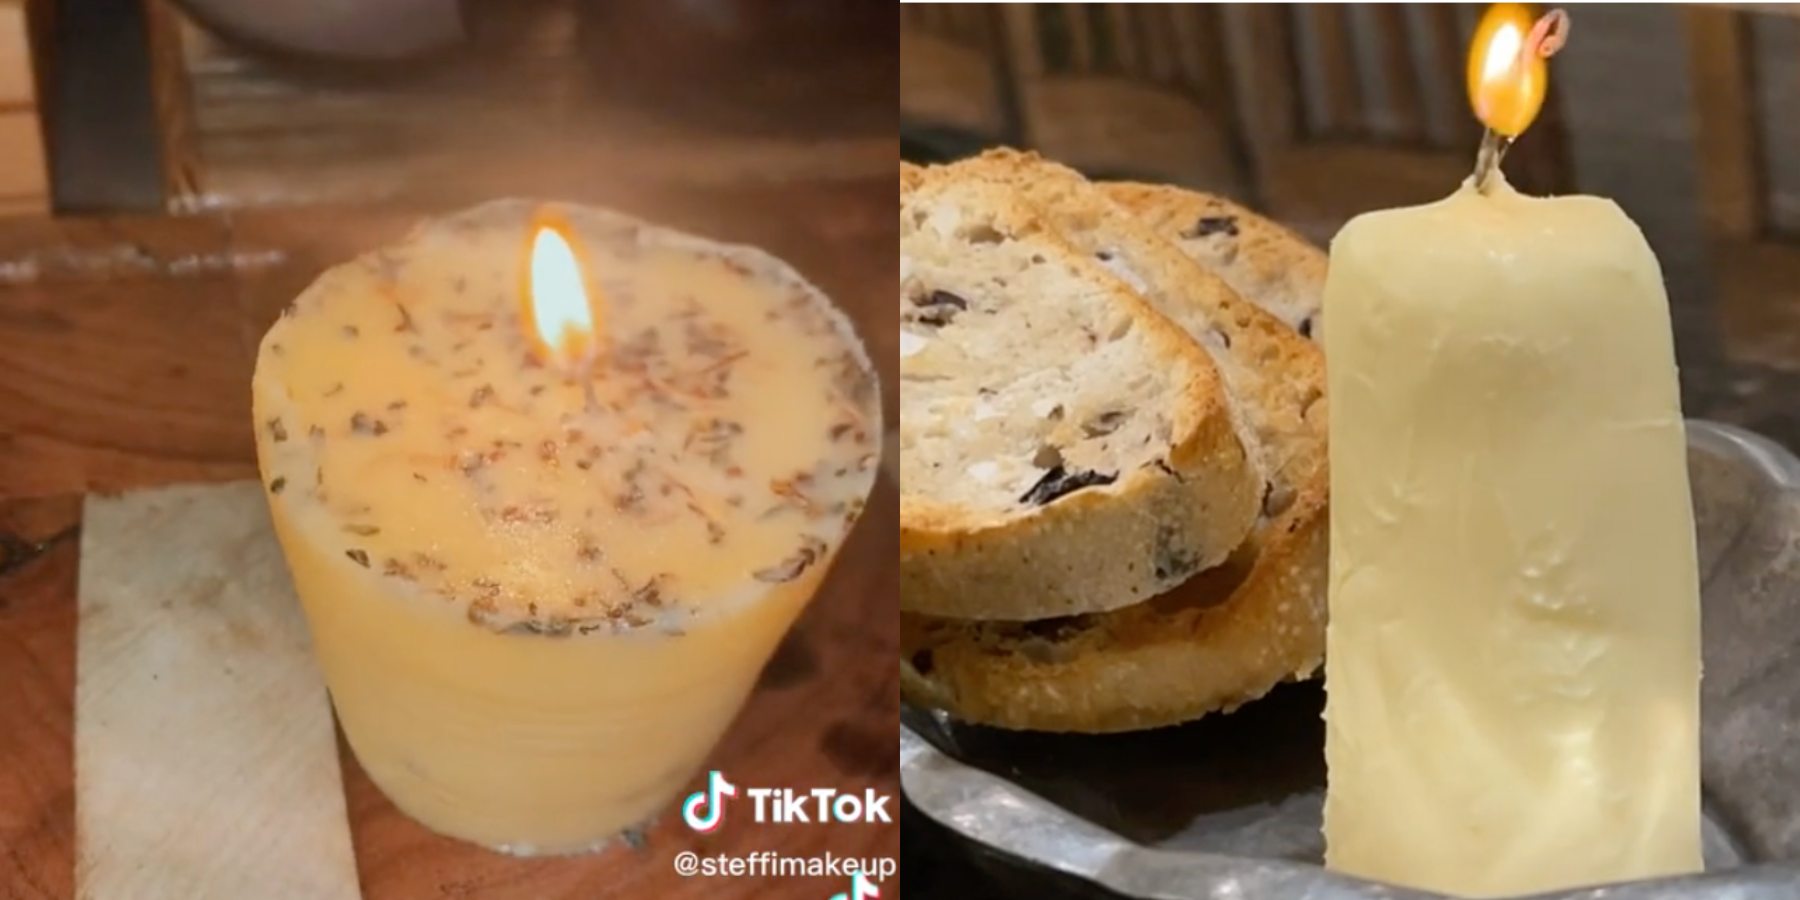 Butter Candles Are The Newest Trend To Hit TikTok